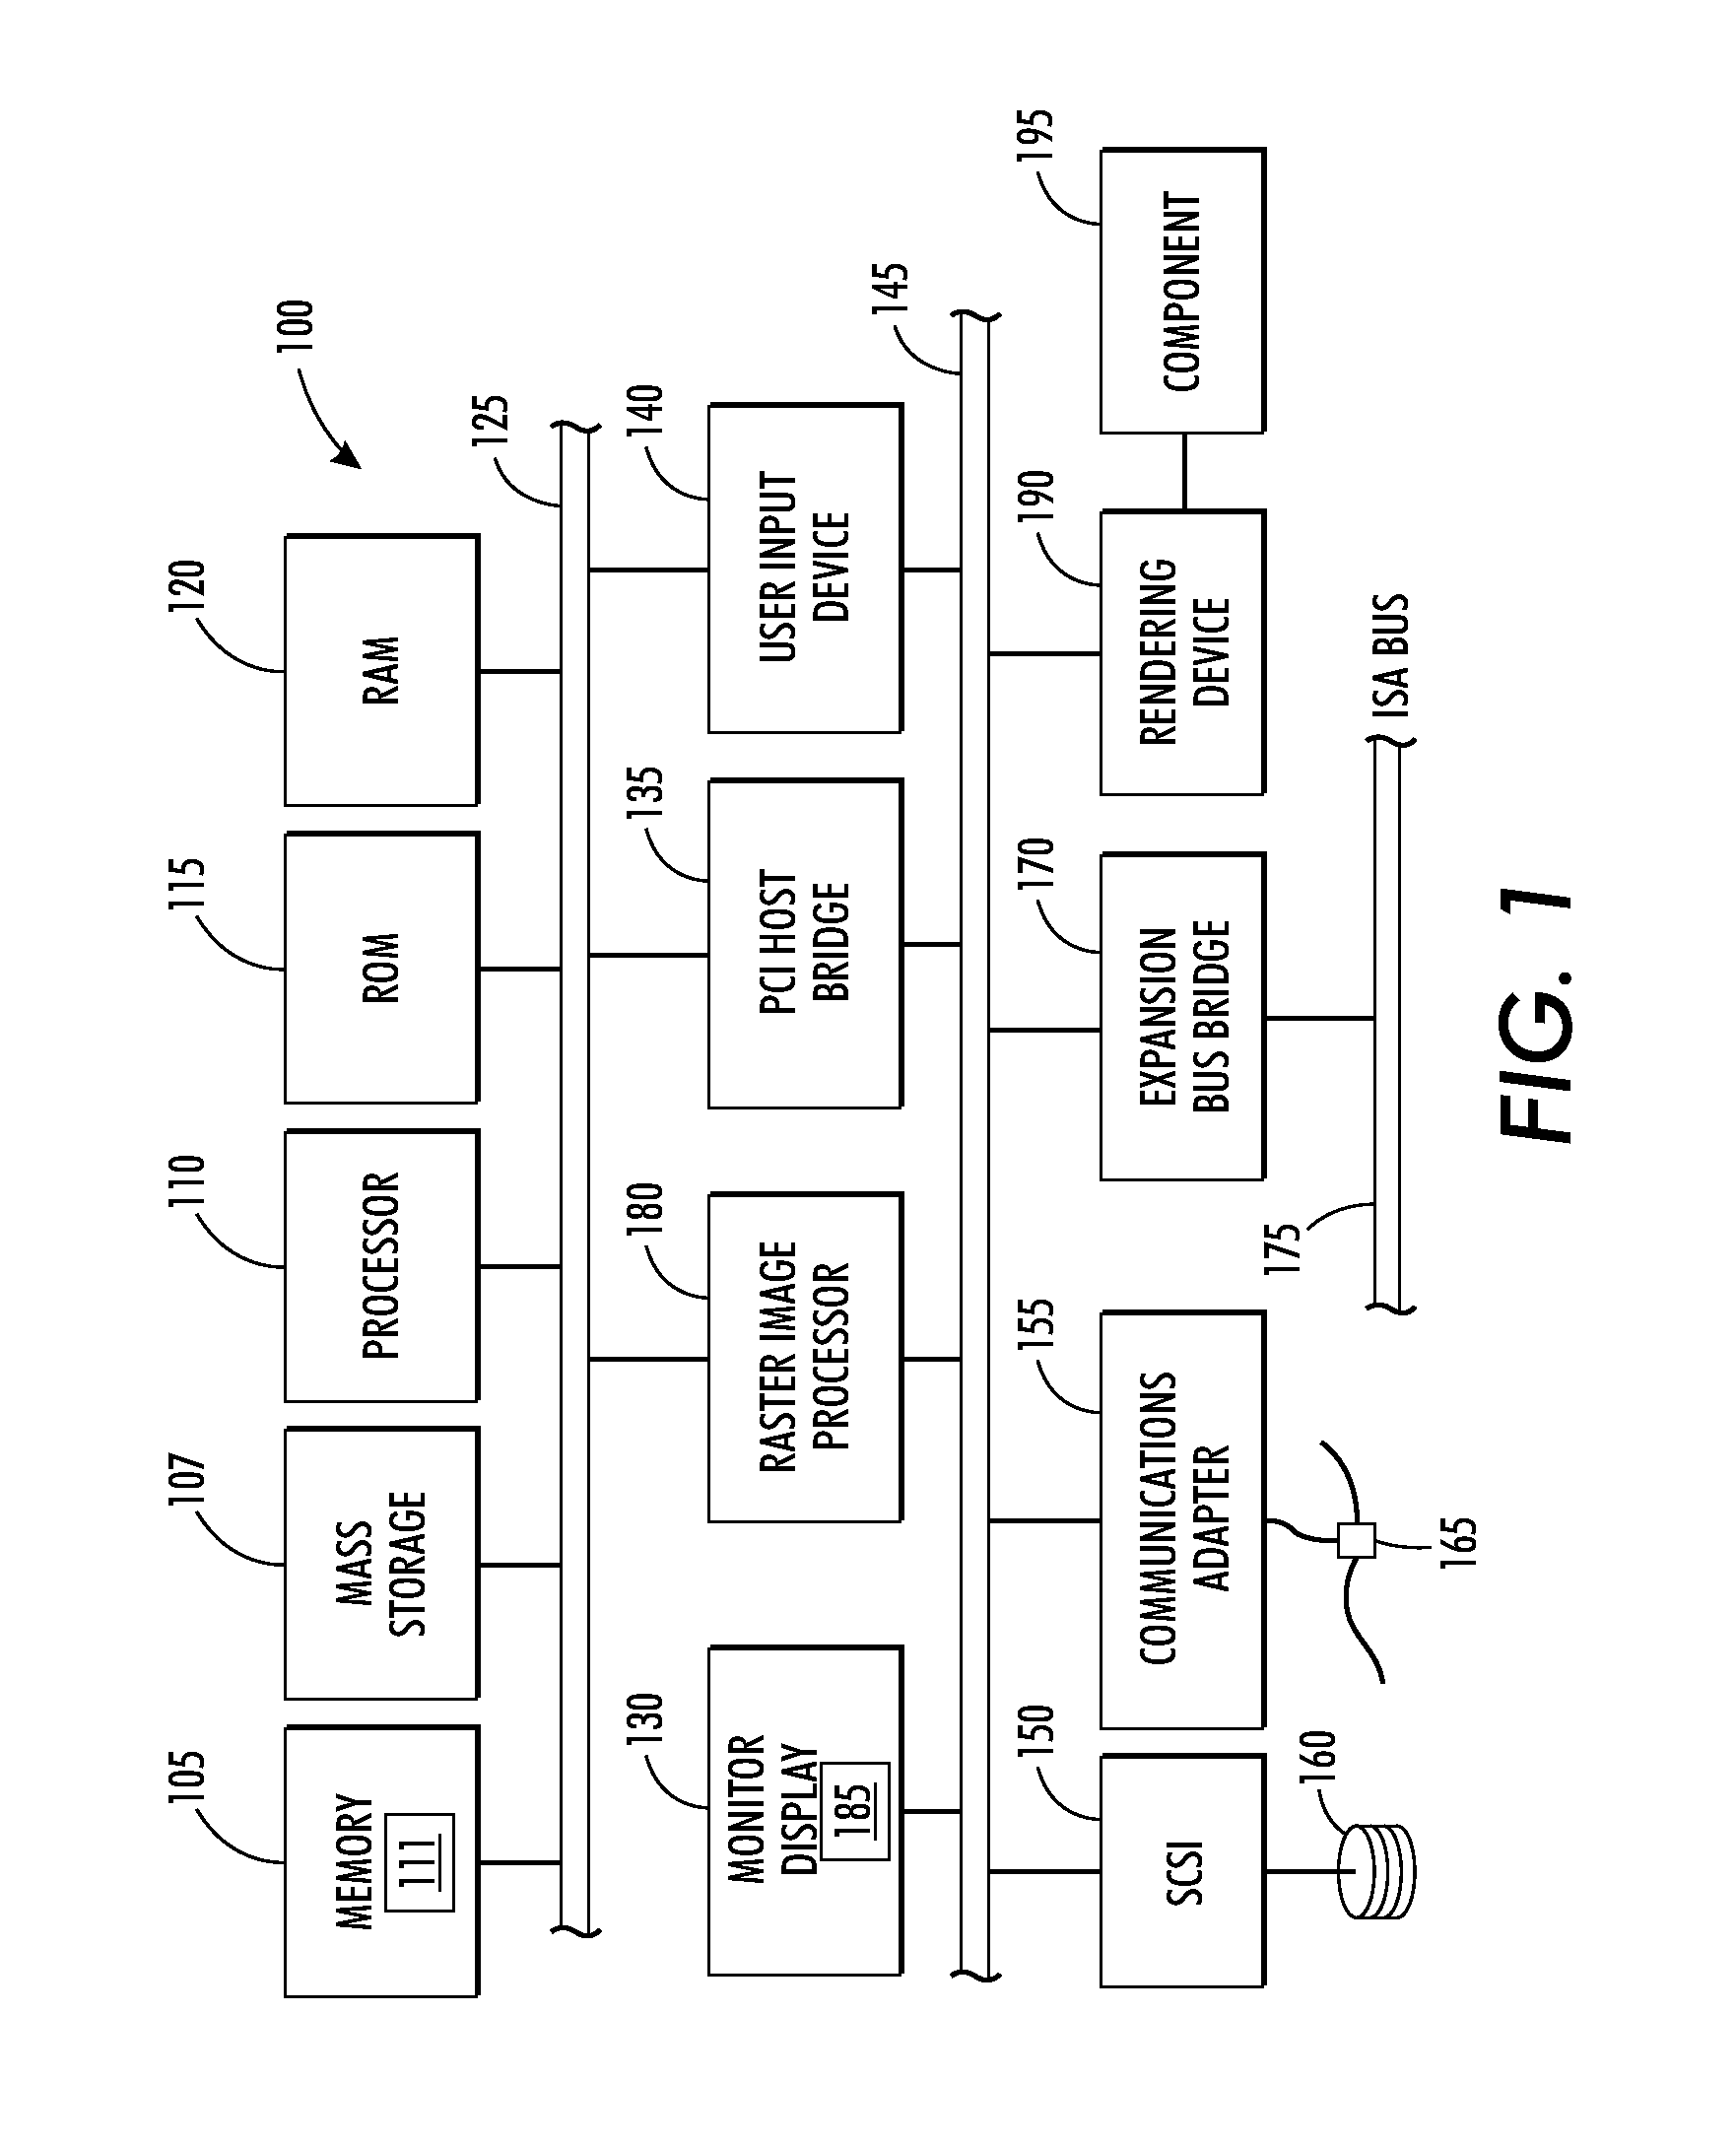 System and method for predicting remaining useful life of device components